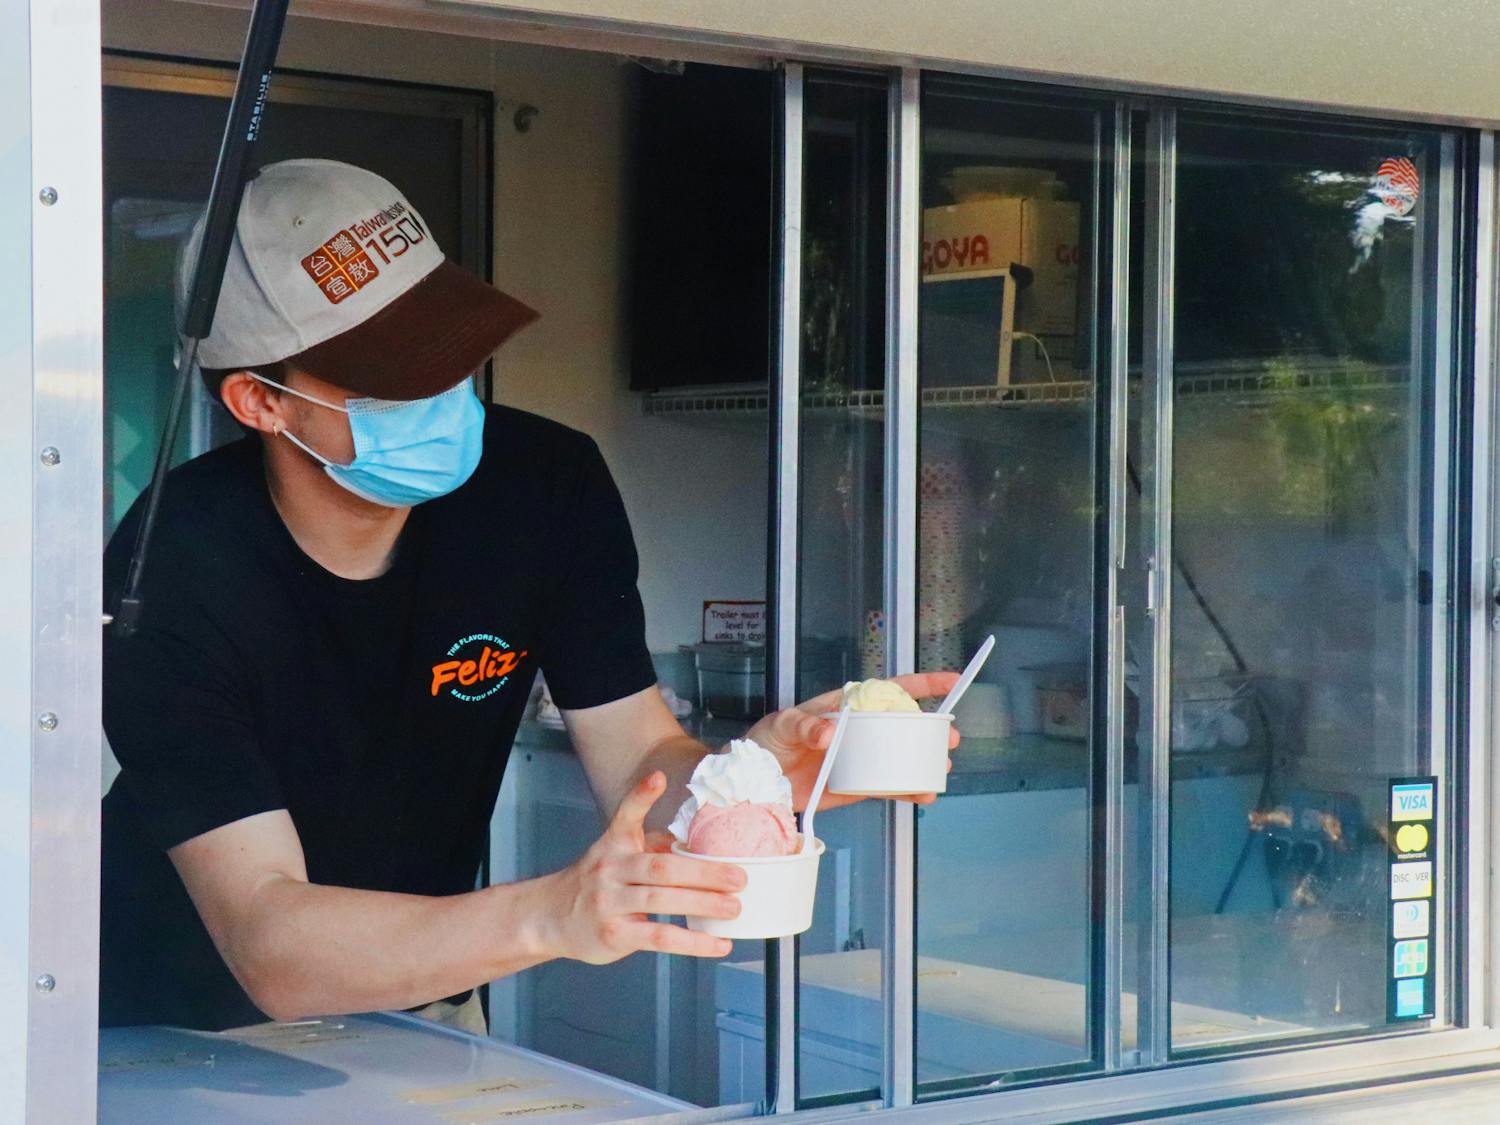 Ryan Ealy, 20, Feliz Flavors shift lead, hands off two small ice creams to customers on Sunday, Sept. 5, 2021. The truck is located at 4th Ave Food Park and has flavors that range from matcha to passion fruit. 